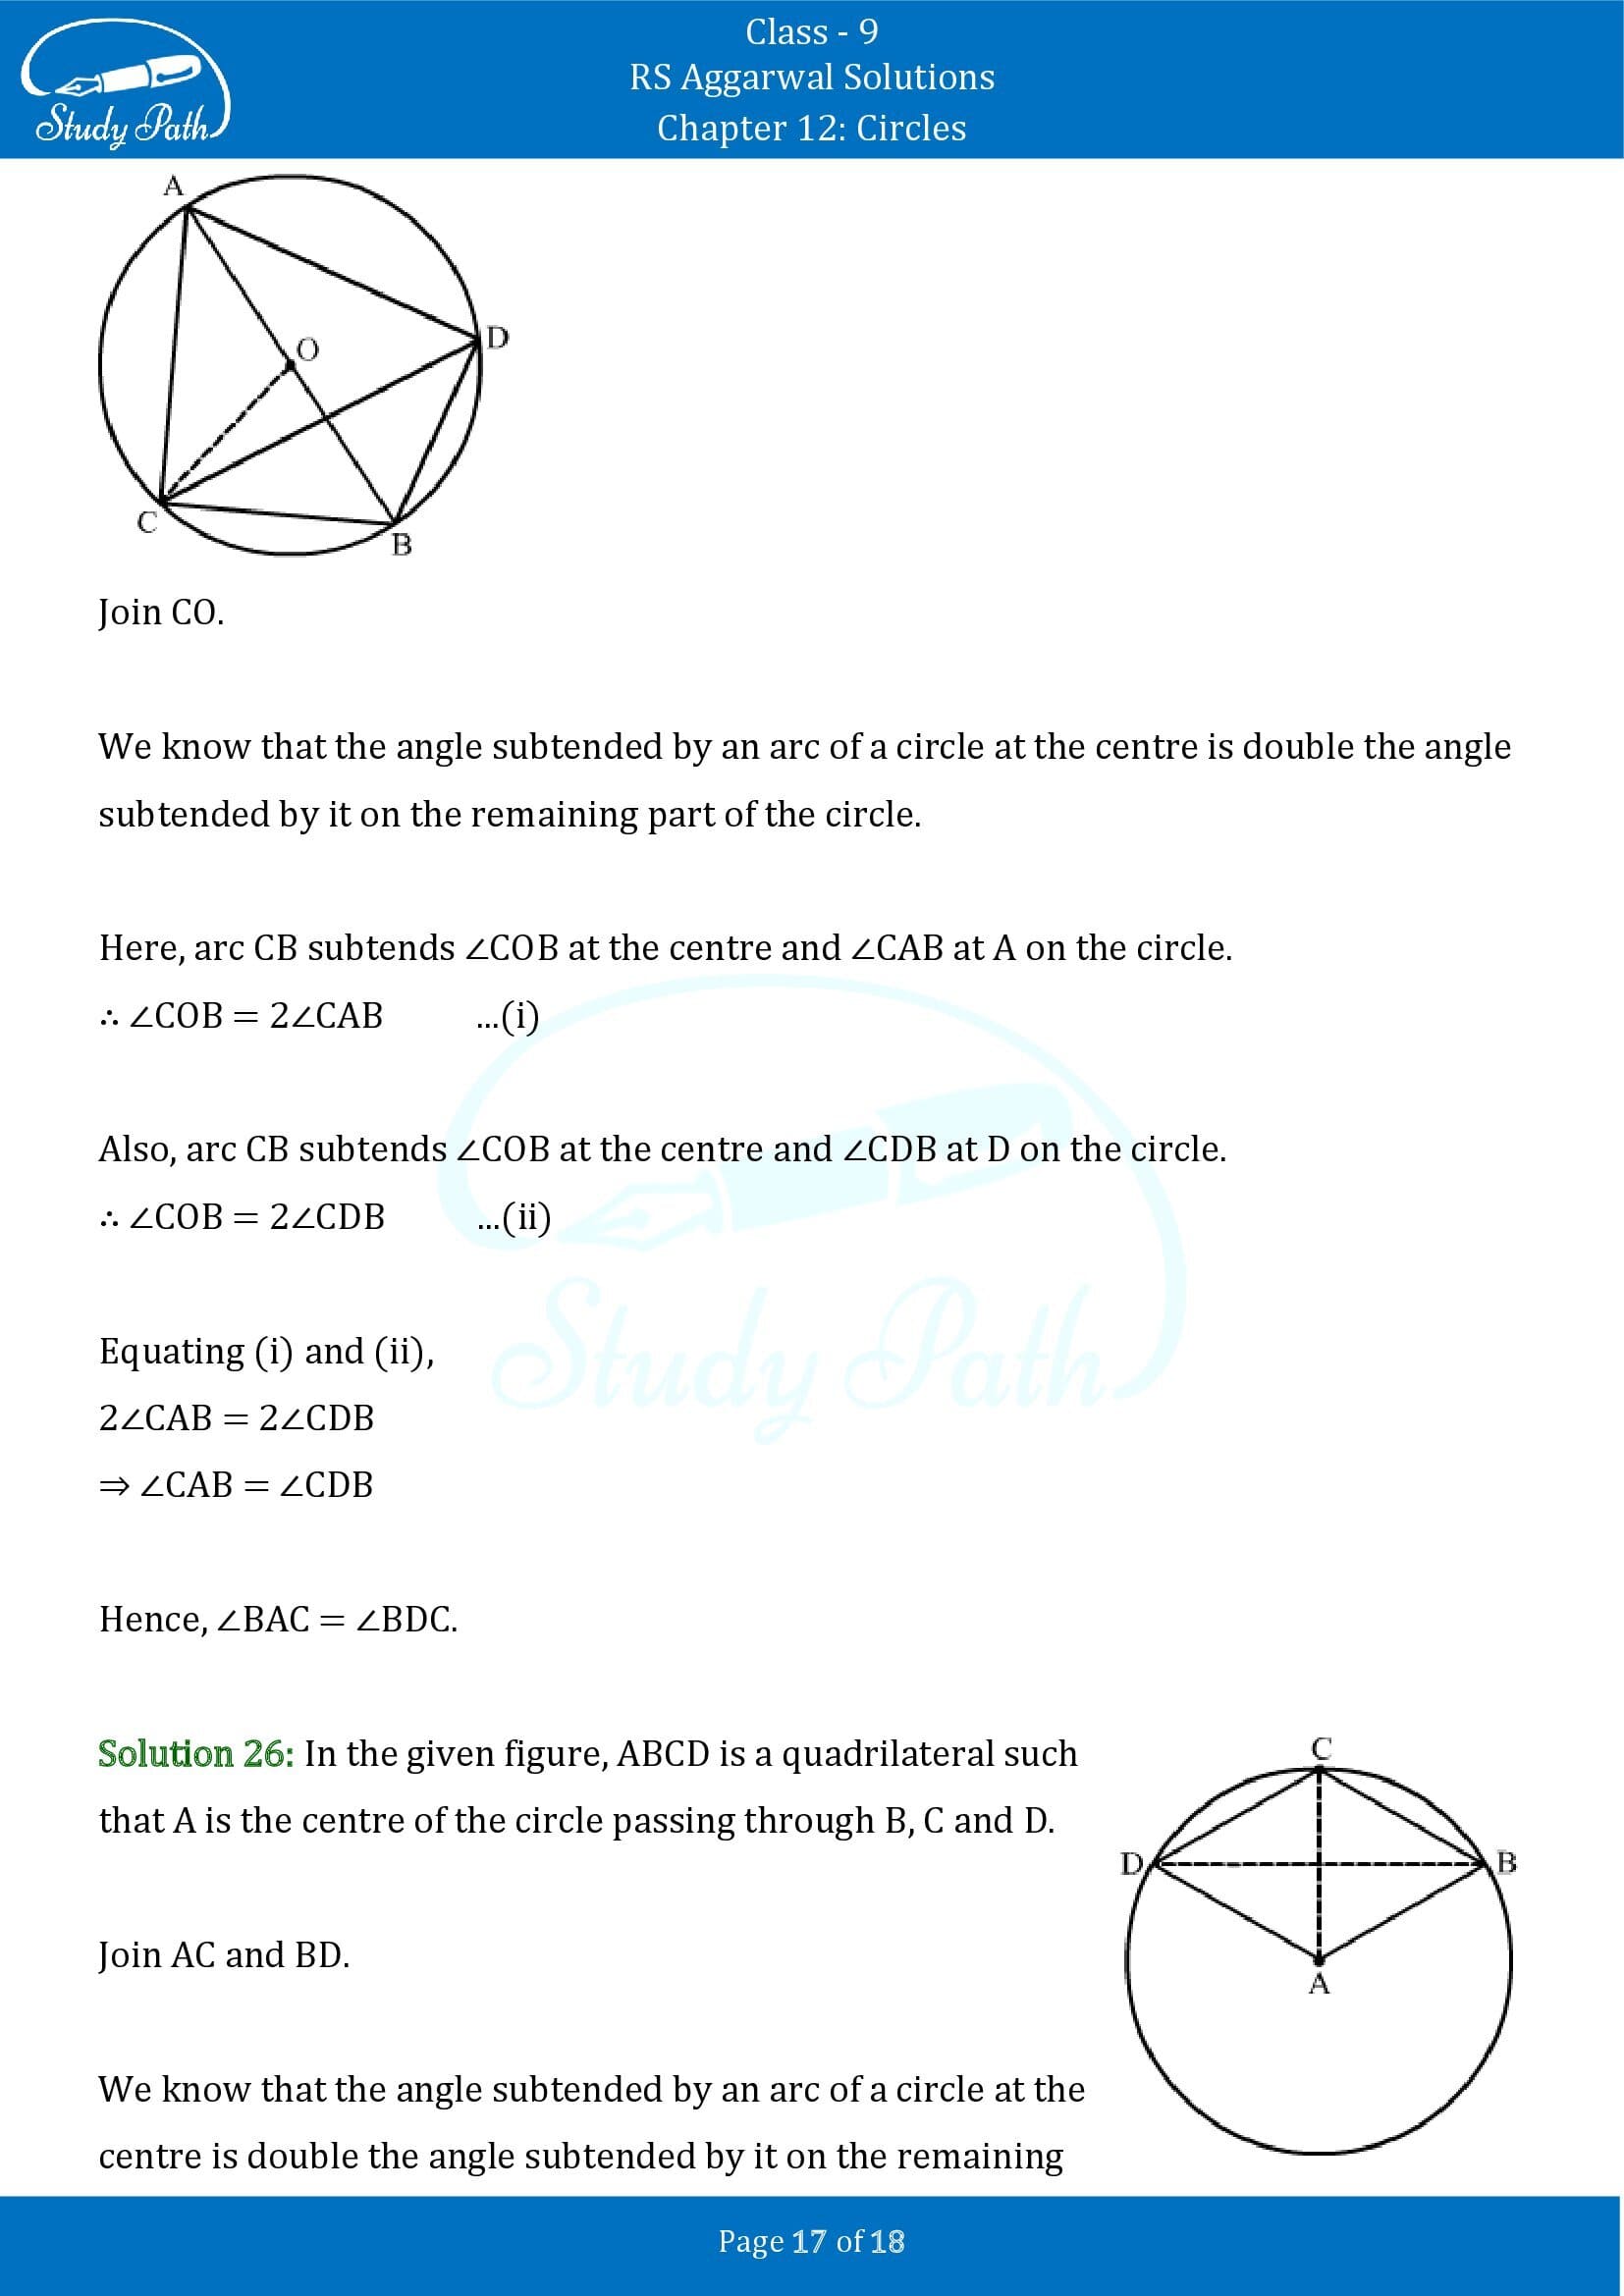 RS Aggarwal Solutions Class 9 Chapter 12 Circles Exercise 12C 00017